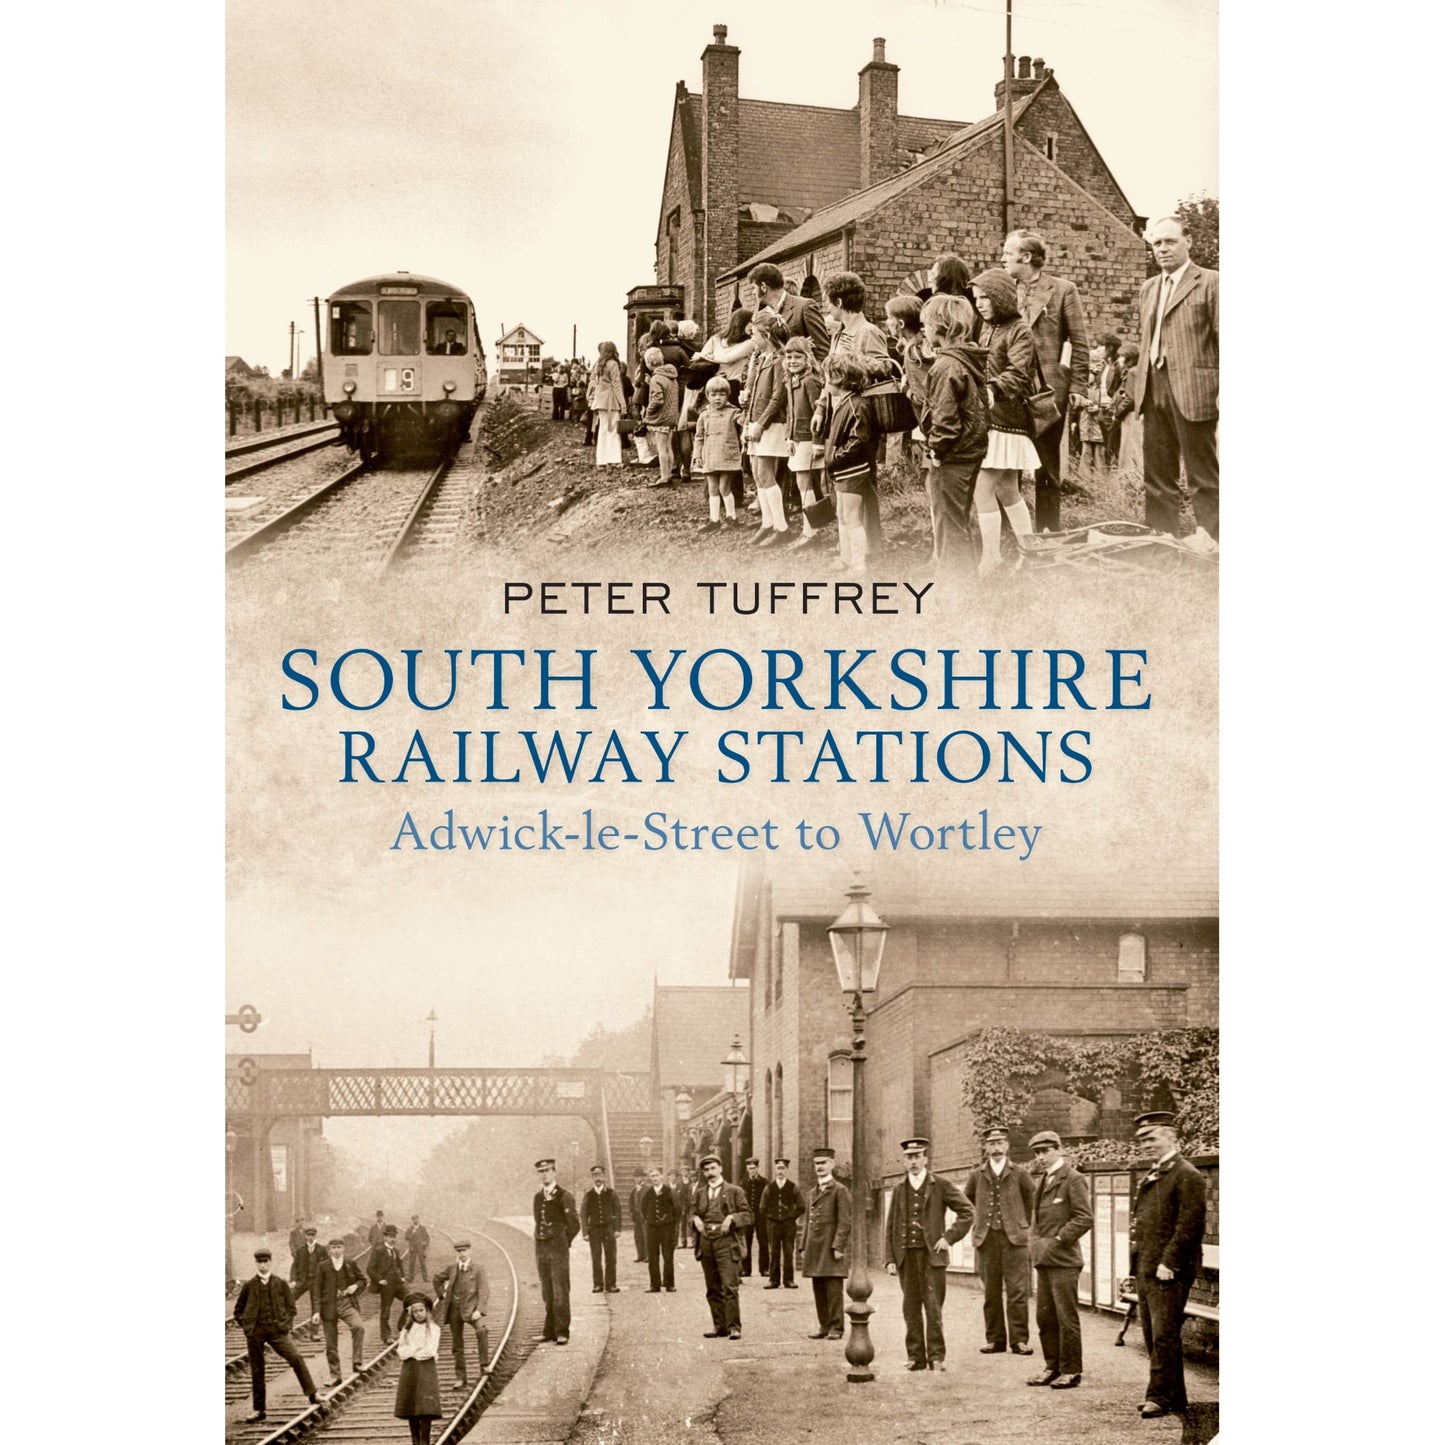 South Yorkshire Railway Stations Book - The Great Yorkshire Shop